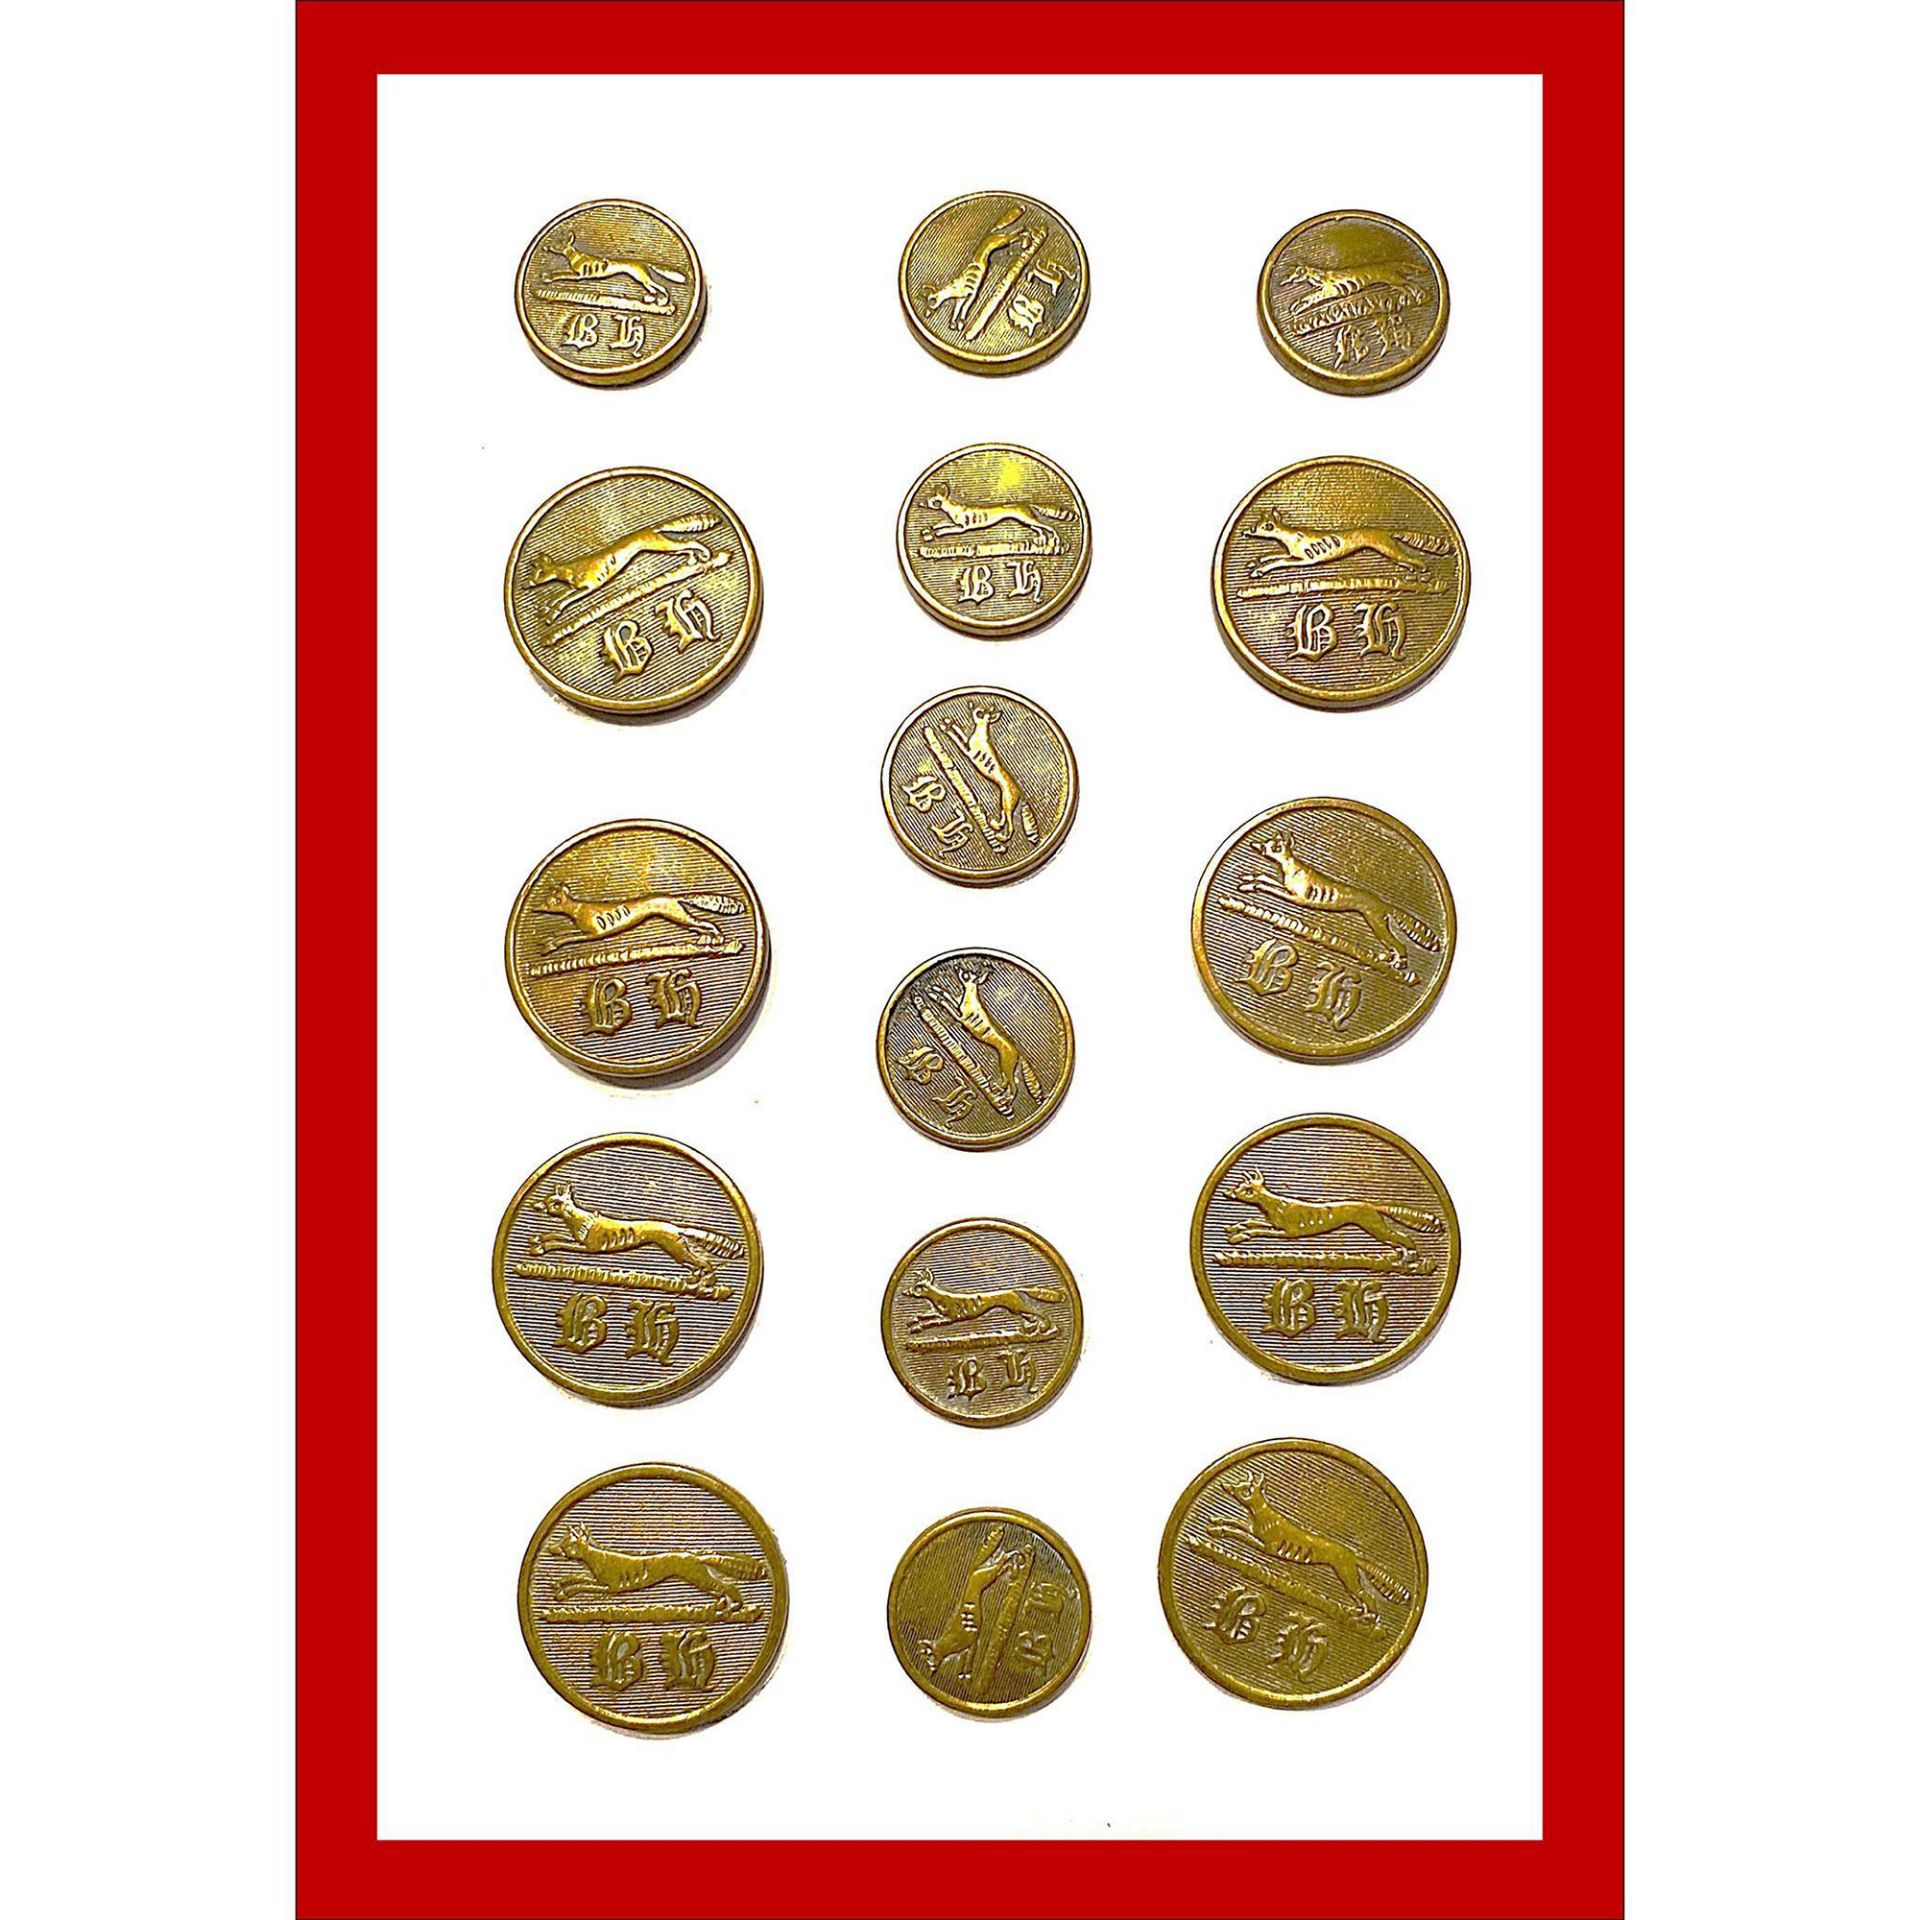 A Card of A Set of Metal Pictorial Animal Buttons